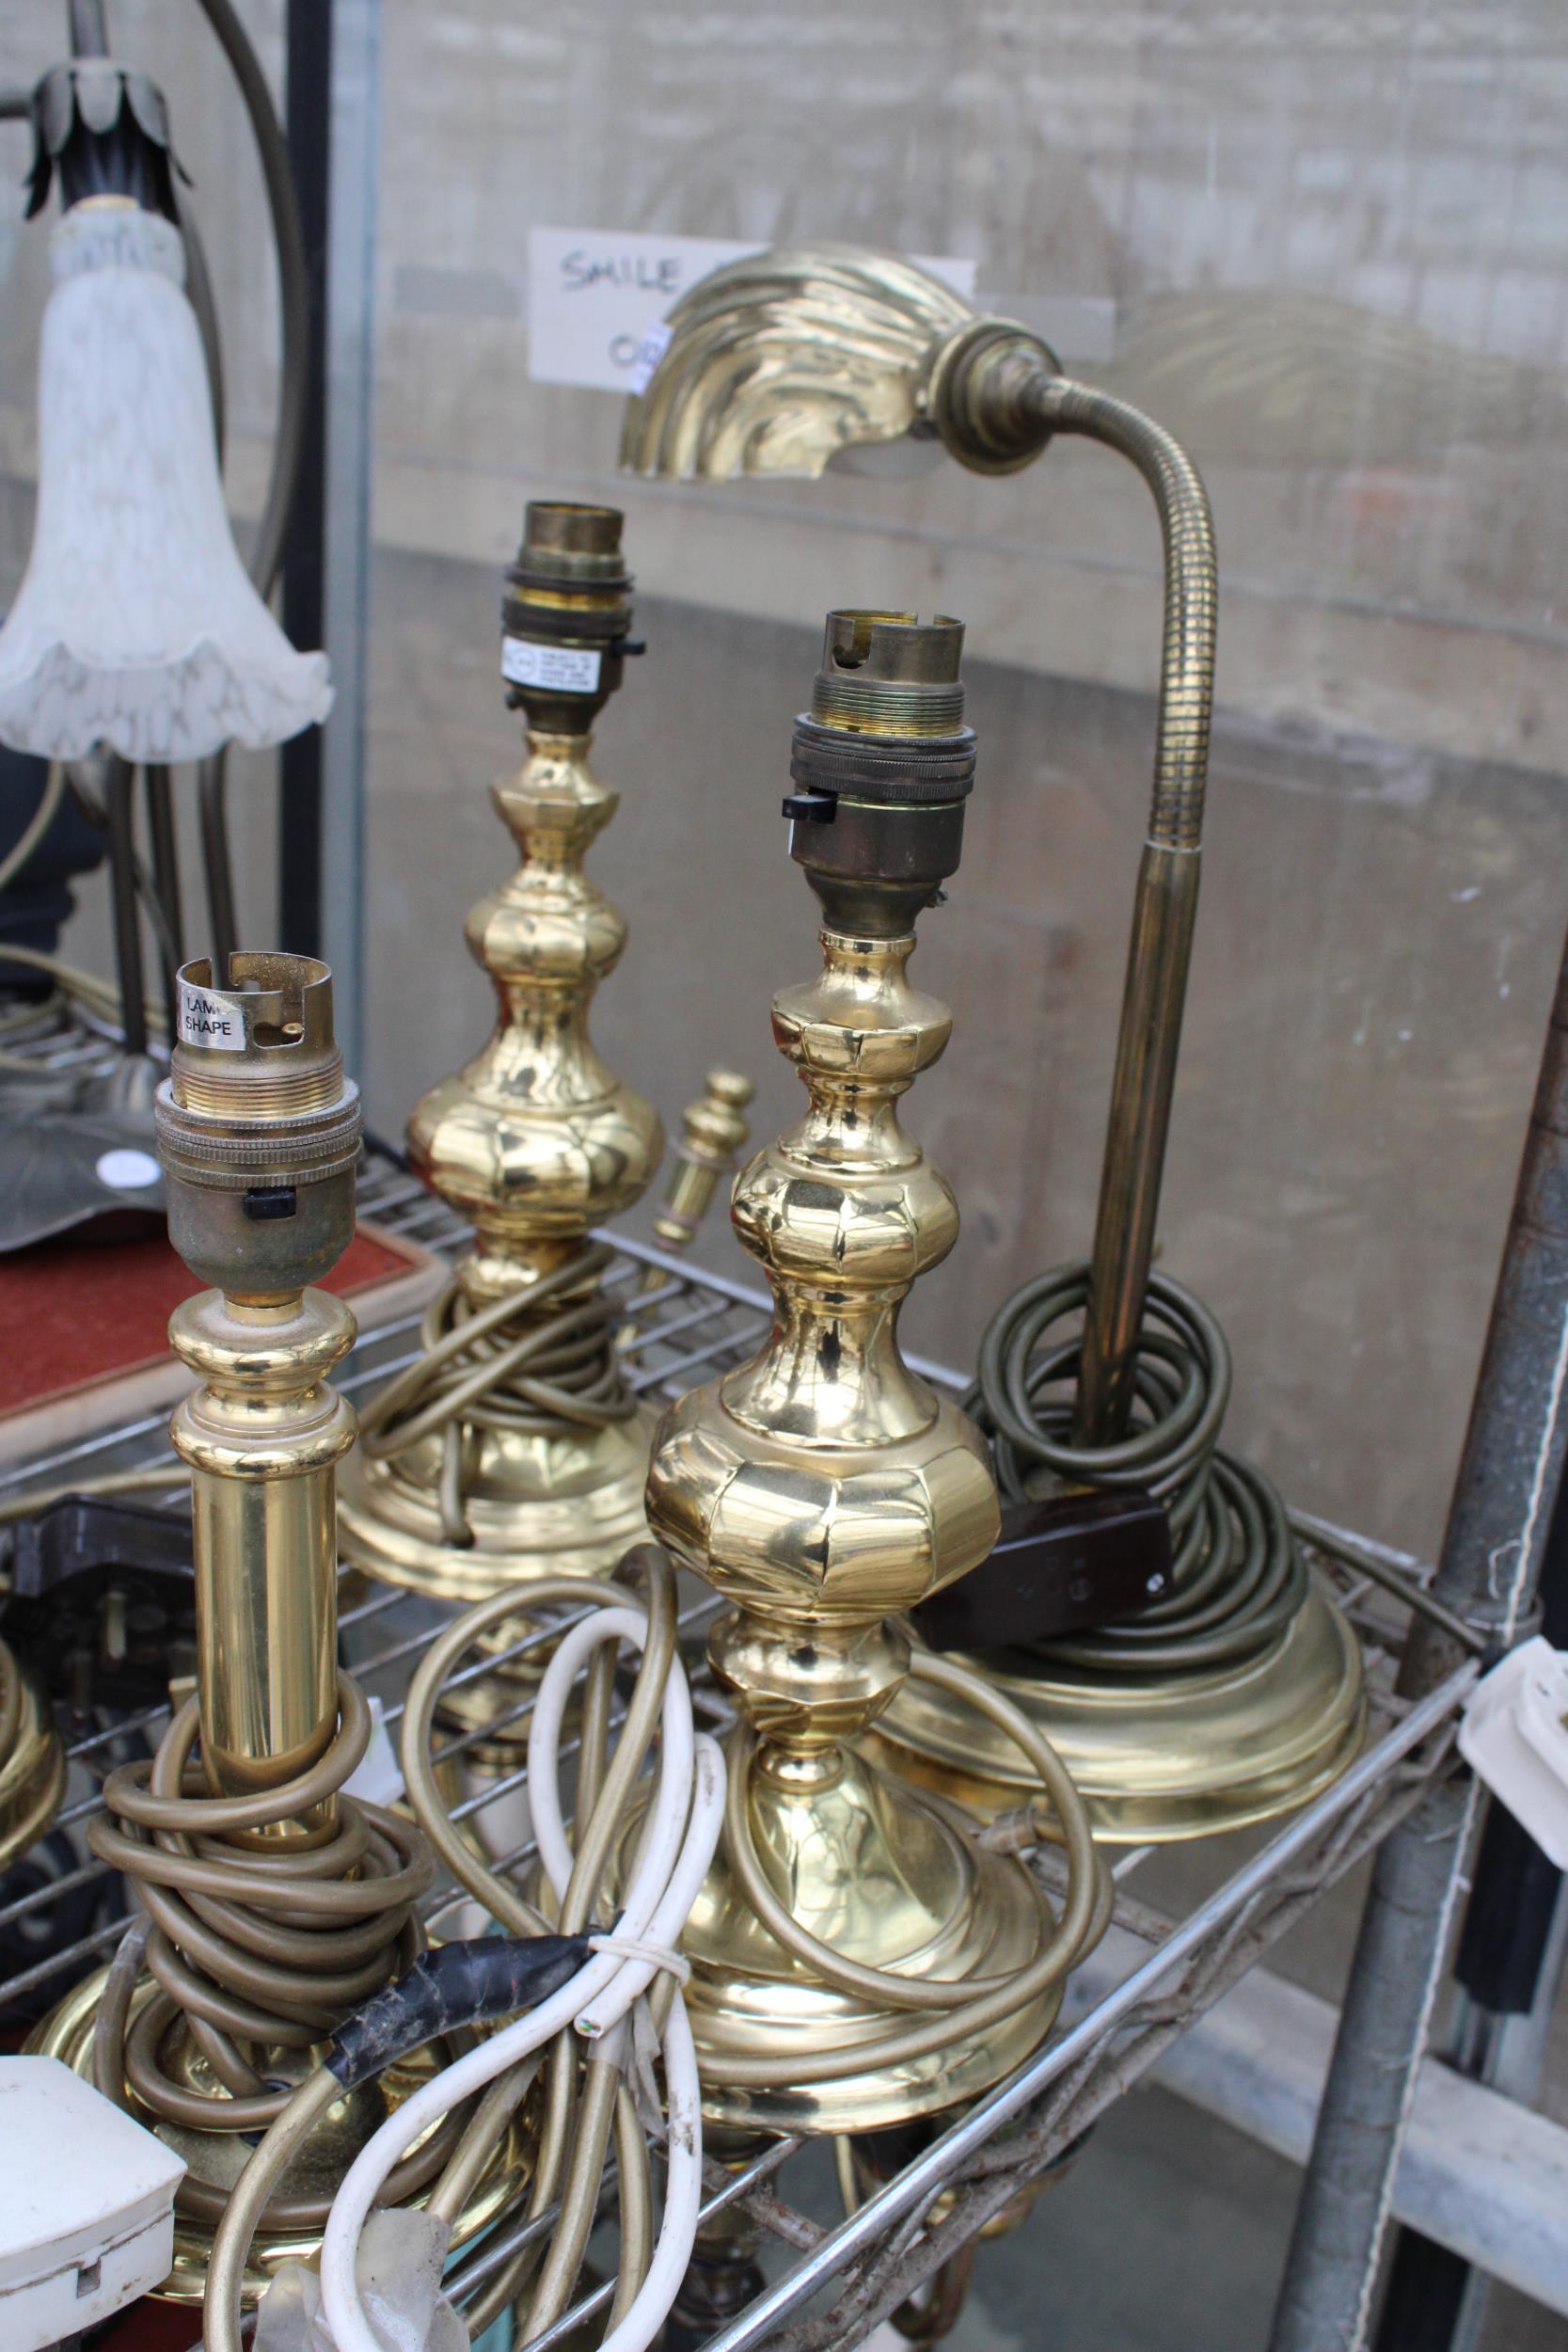 SIX VARIOUS VINTAGE BRASS TABLE LAMPS - Image 3 of 3